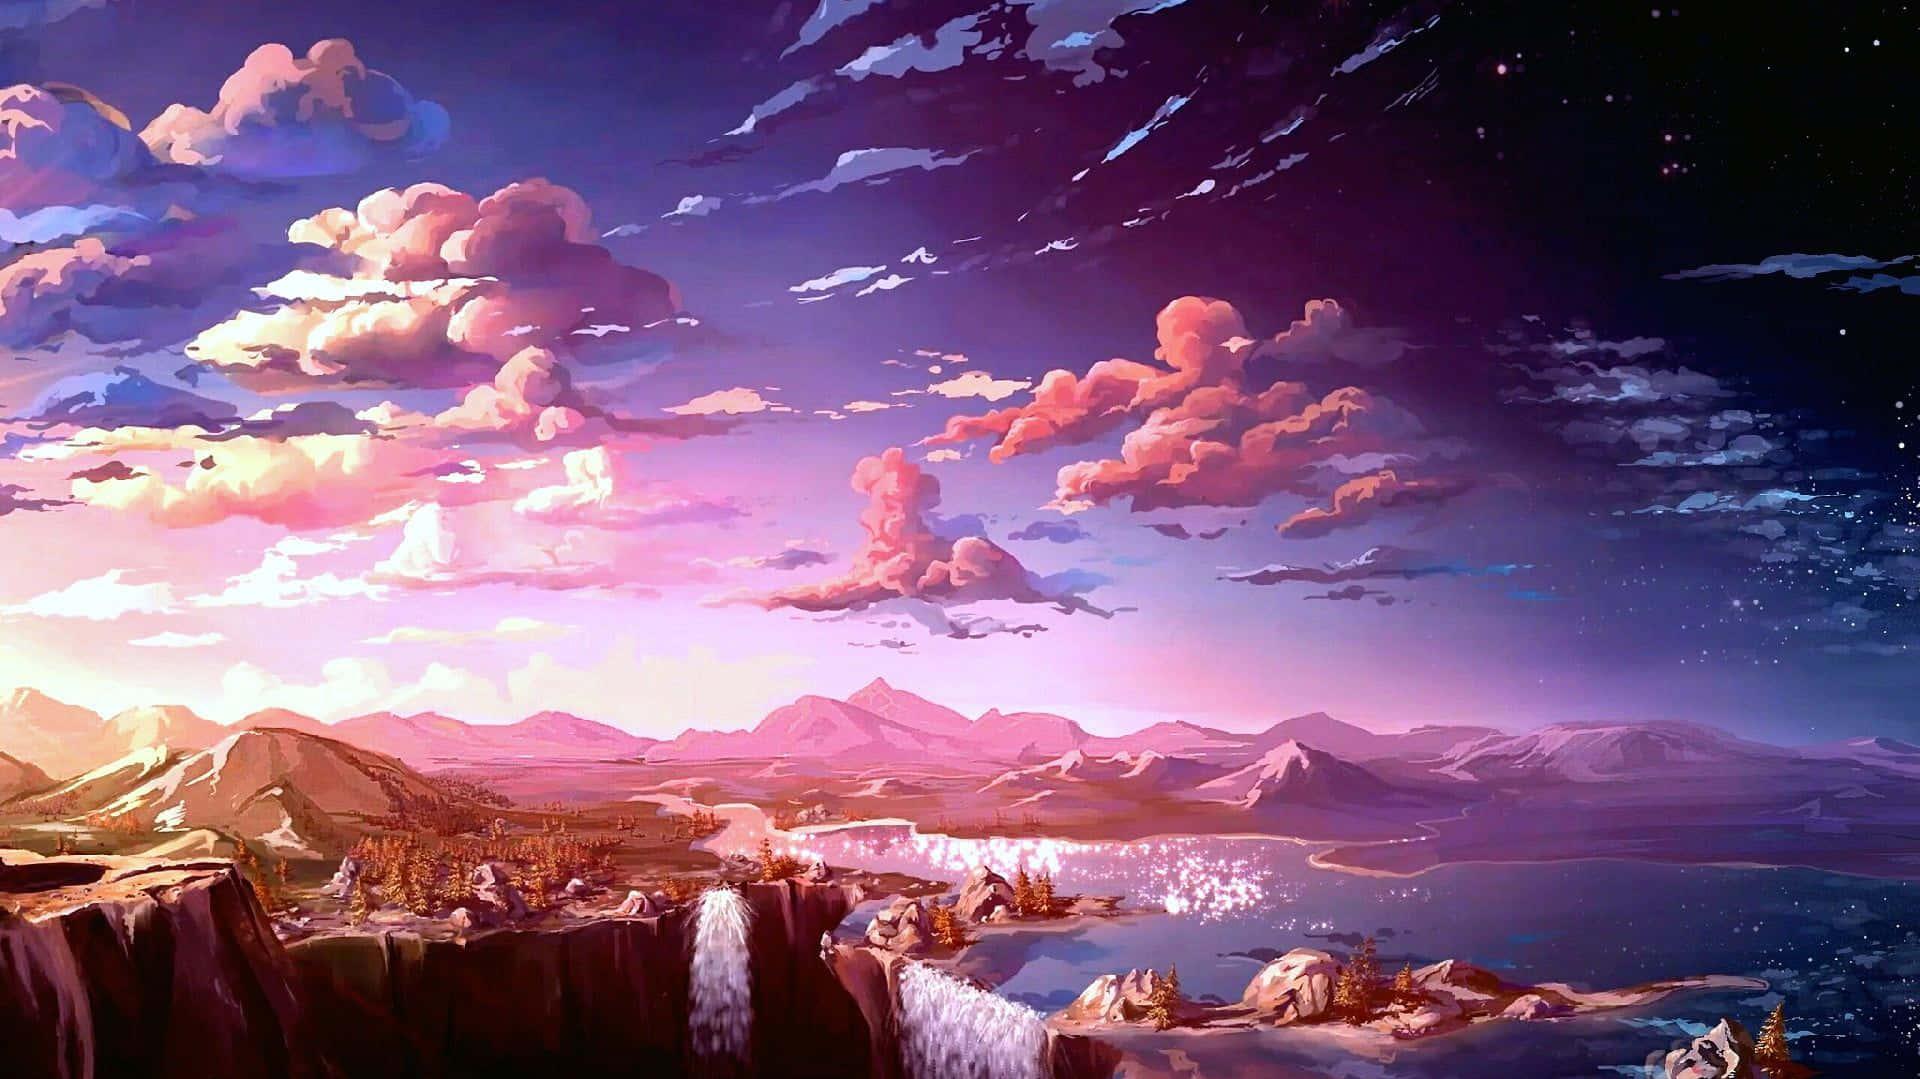 Anime Aesthetic Sky With Clouds Ps4 Wallpaper